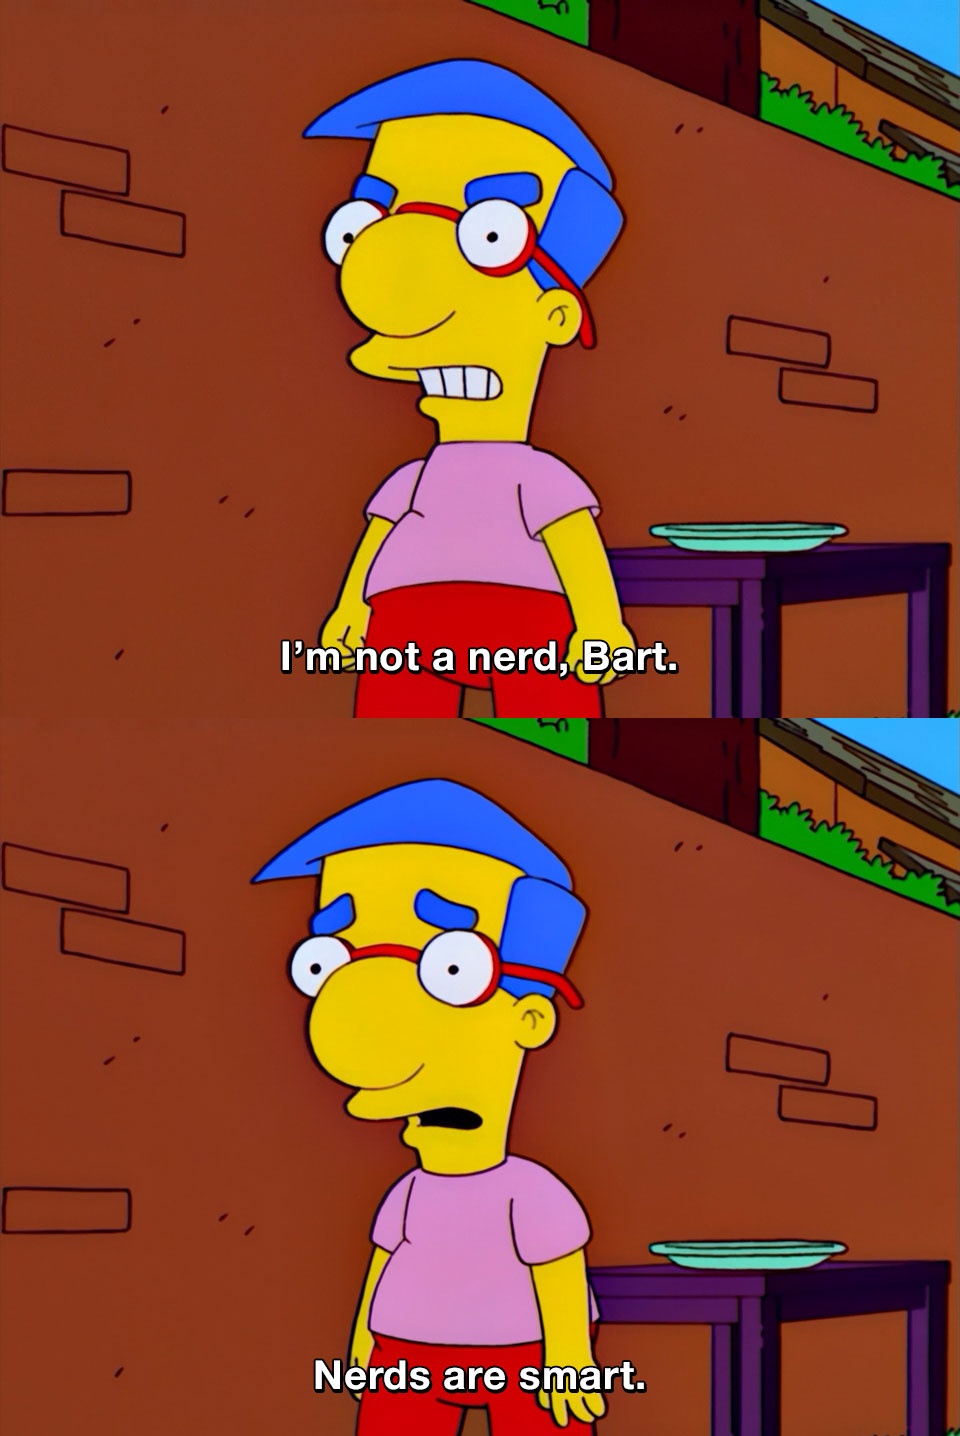 I M Not A Nerd Bart Nerds Are Smart The Simpsons